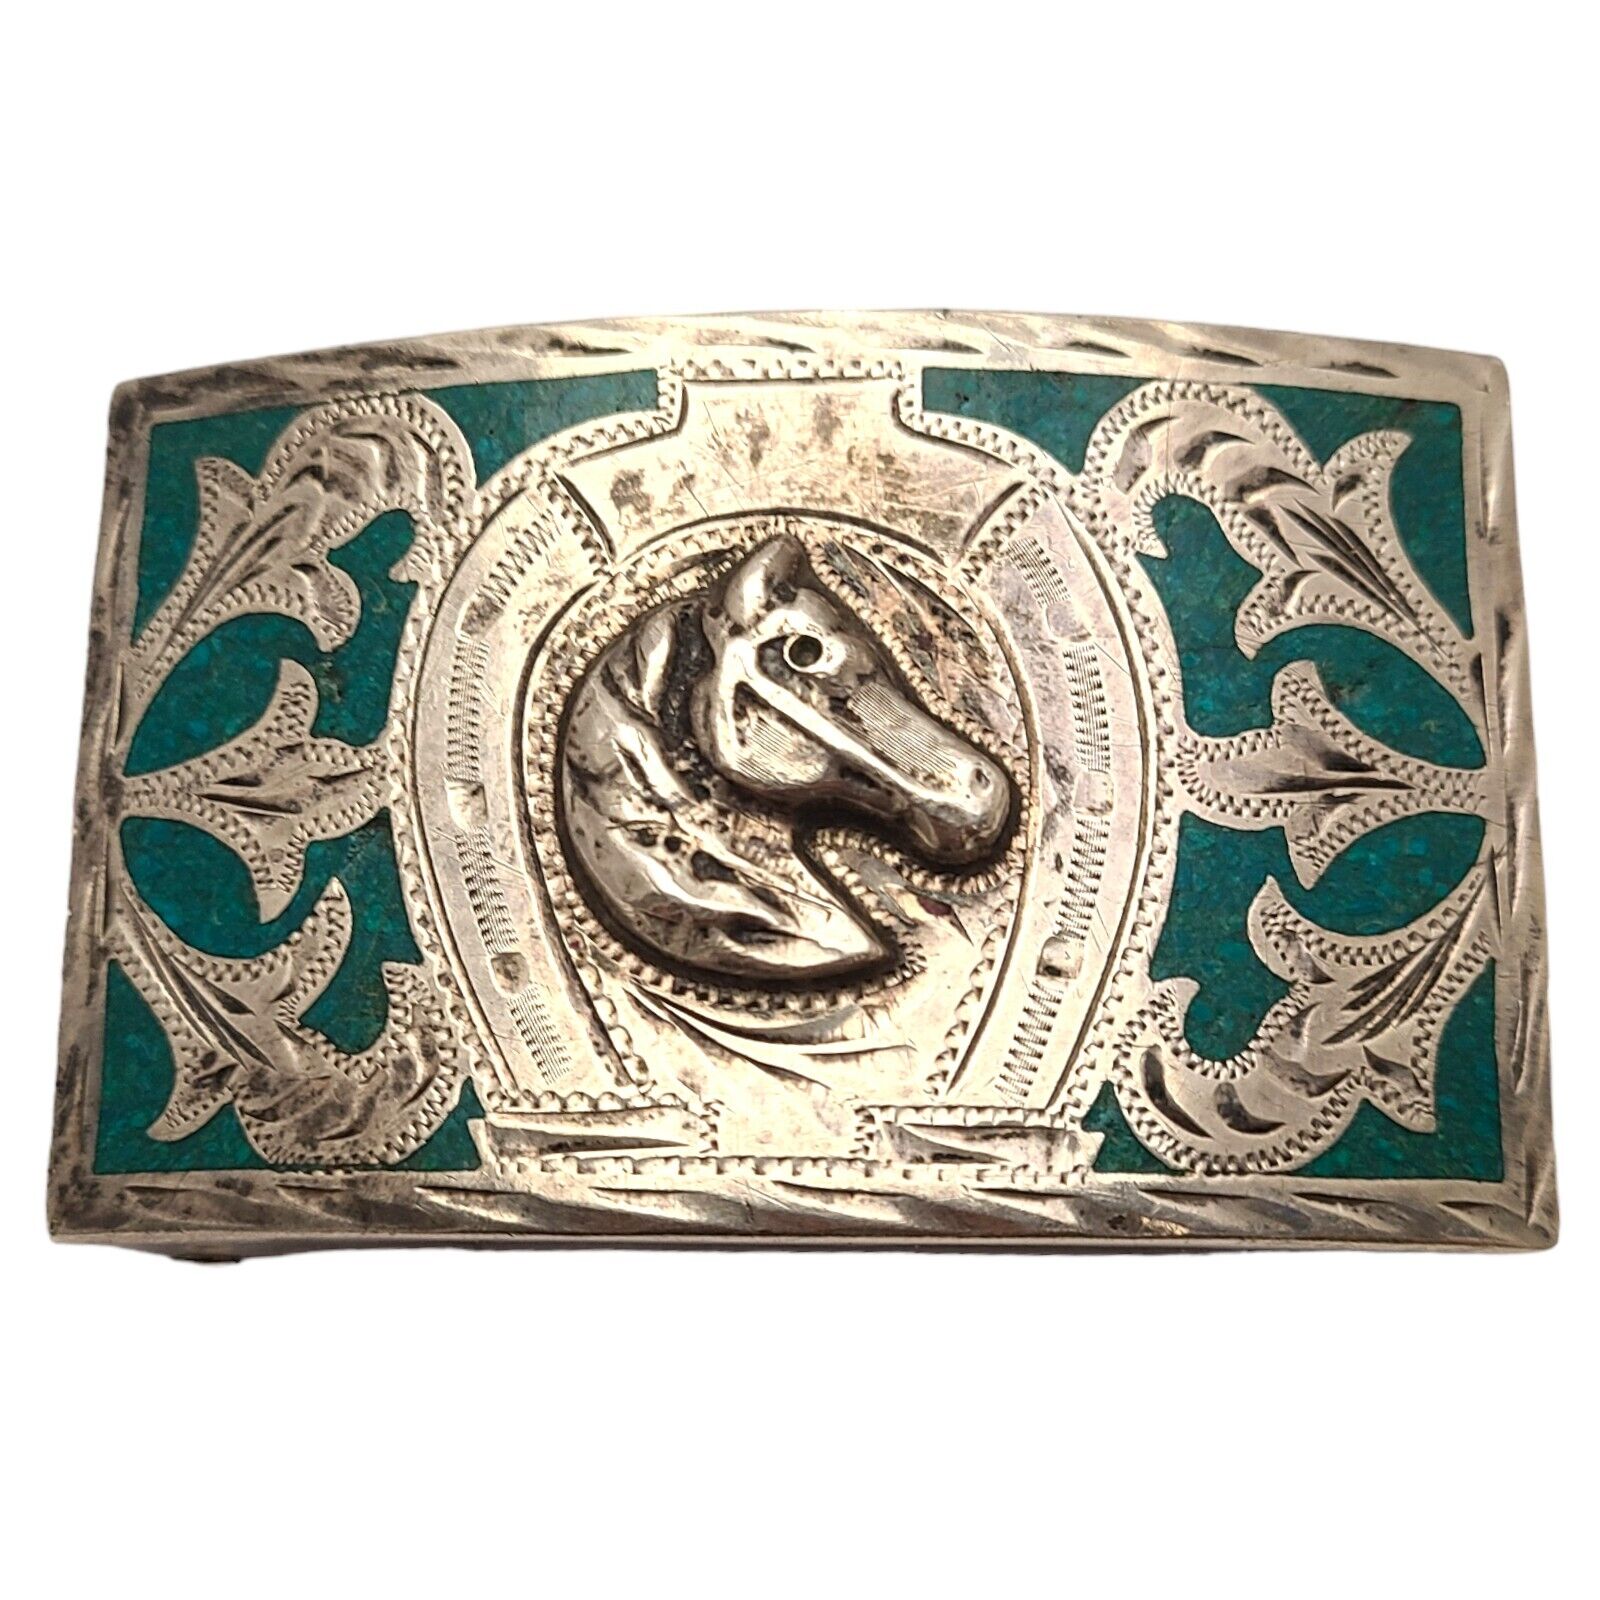 Plata De Jalisco Mex huge Sterling Silver horsecrushed turquoise inlaid Buckle